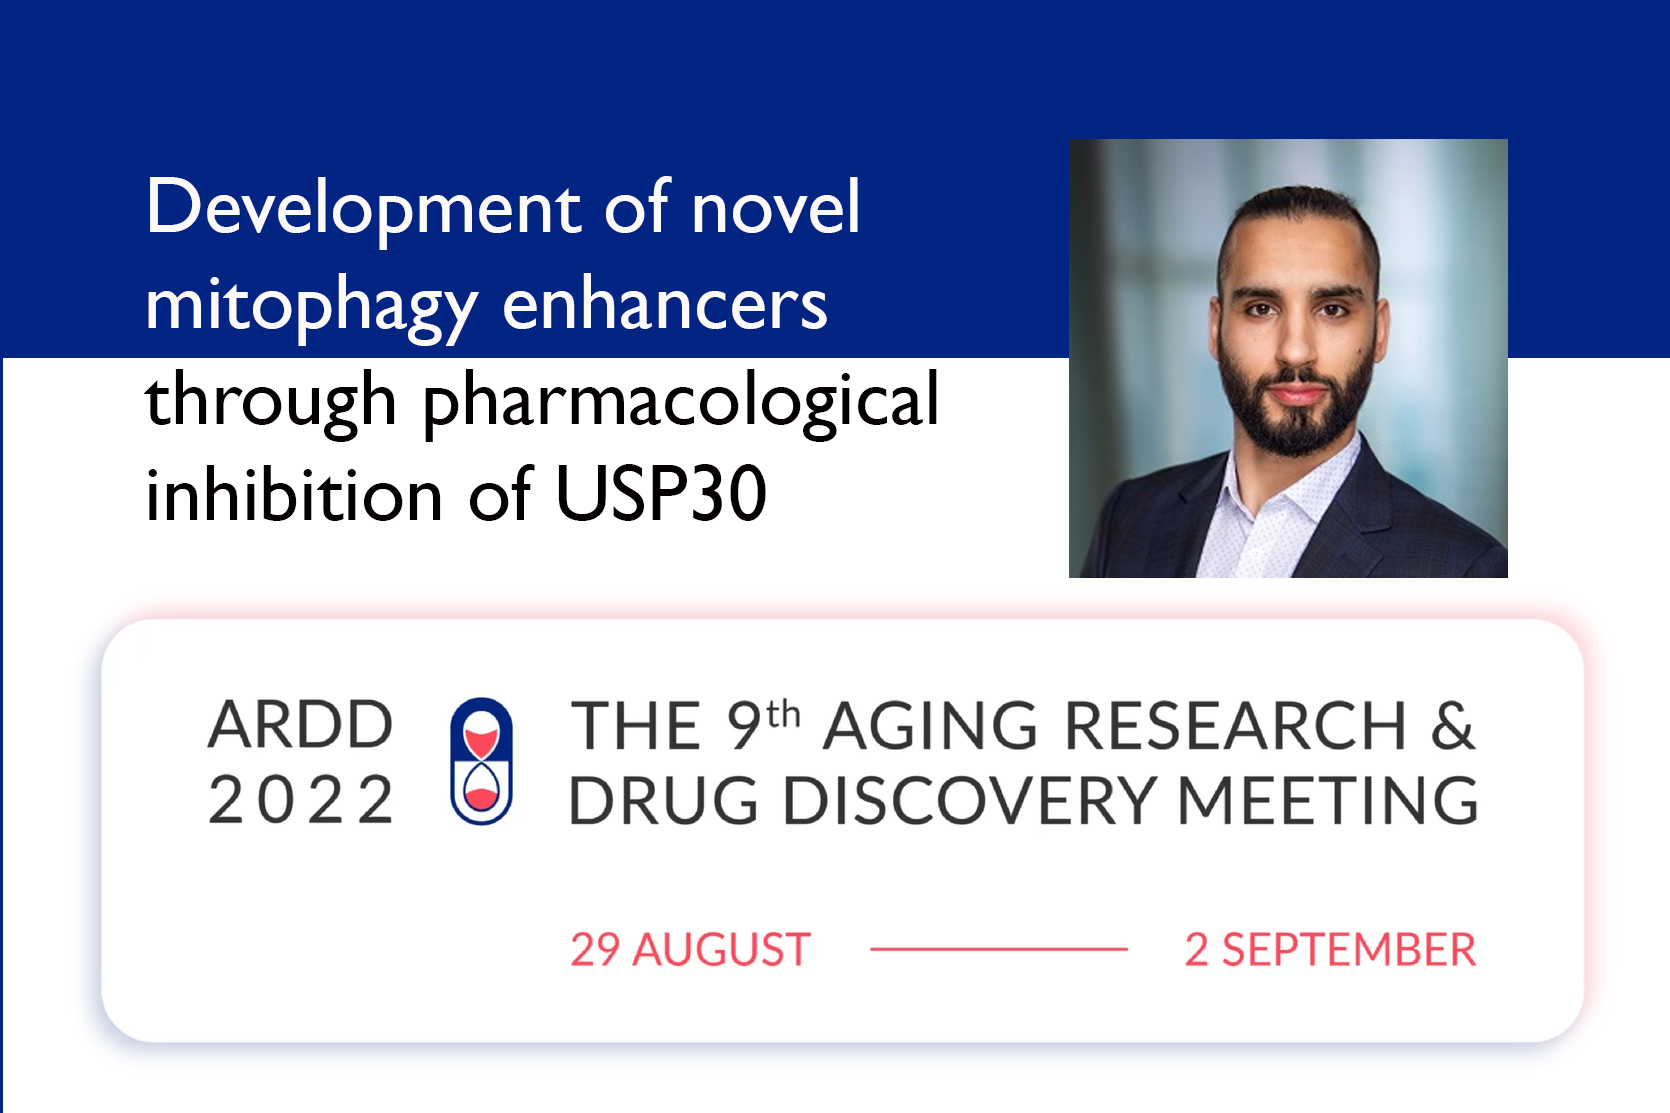 9th Aging Research & Drug Discovery Meeting